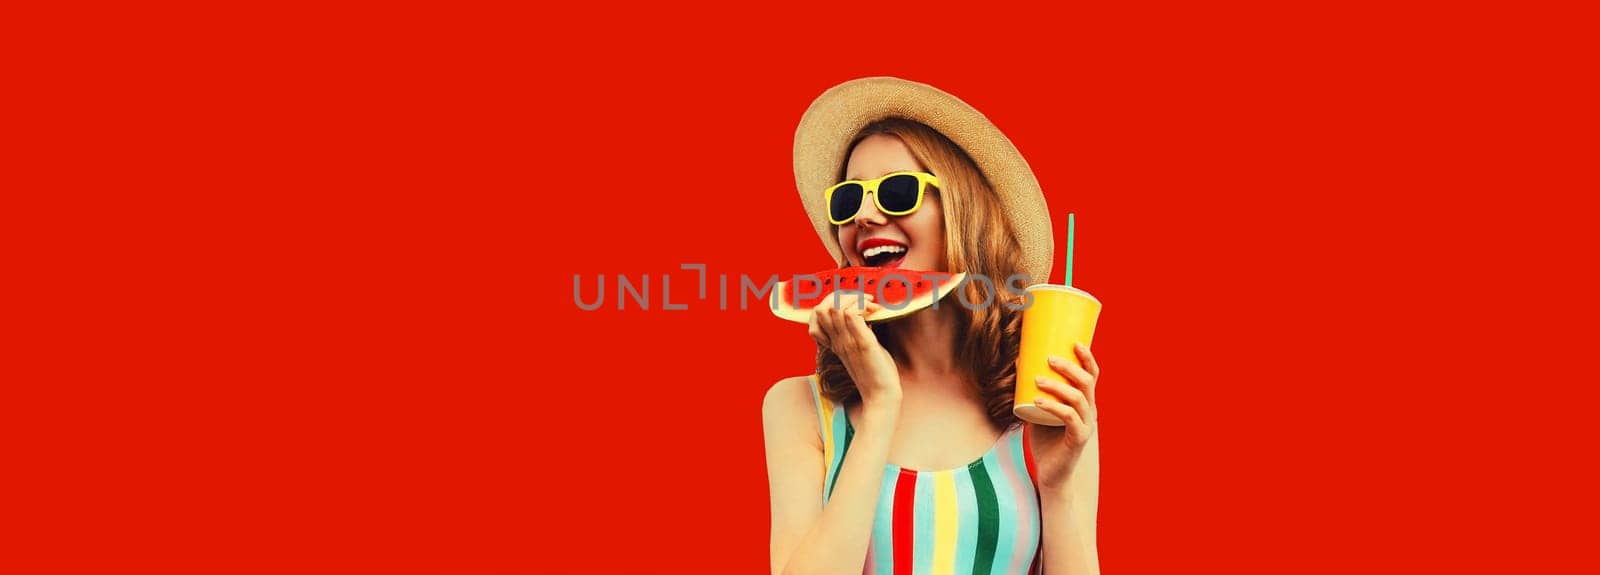 Summer portrait of happy smiling young woman eating fresh juicy slice of watermelon with cup of juice wearing tourist straw hat on red background